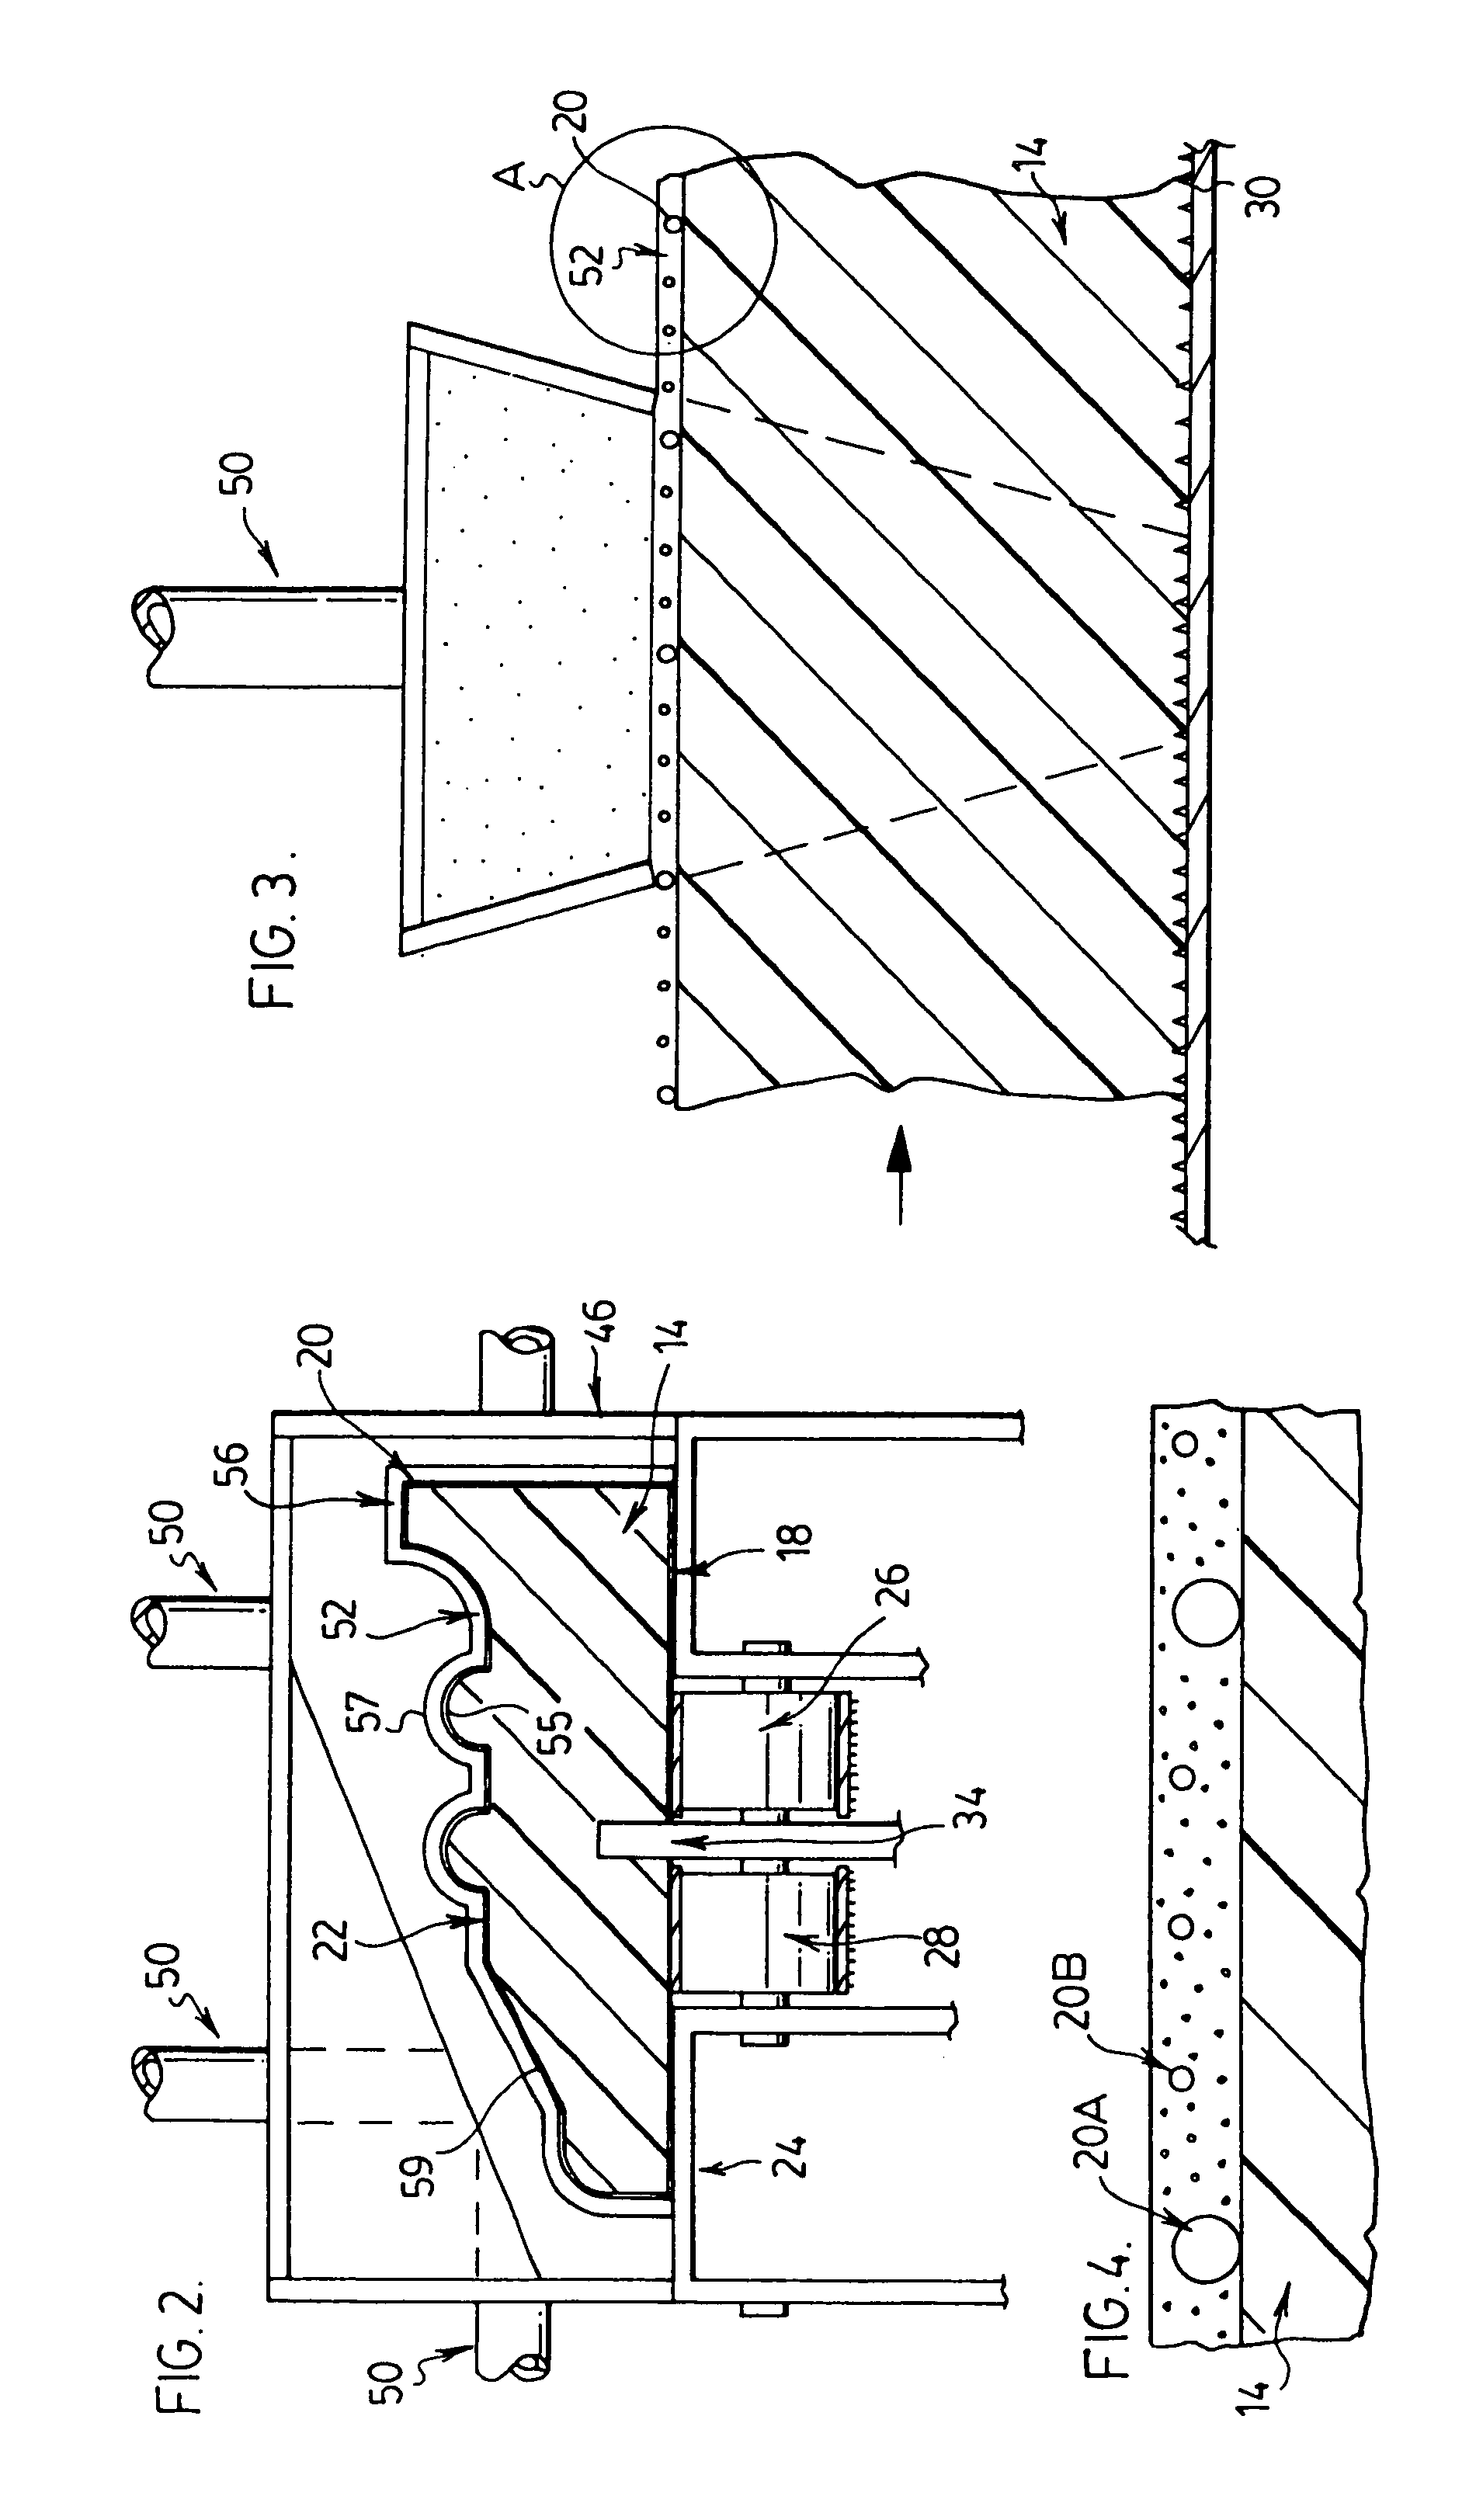 Method and apparatus for coating a decorative workpiece